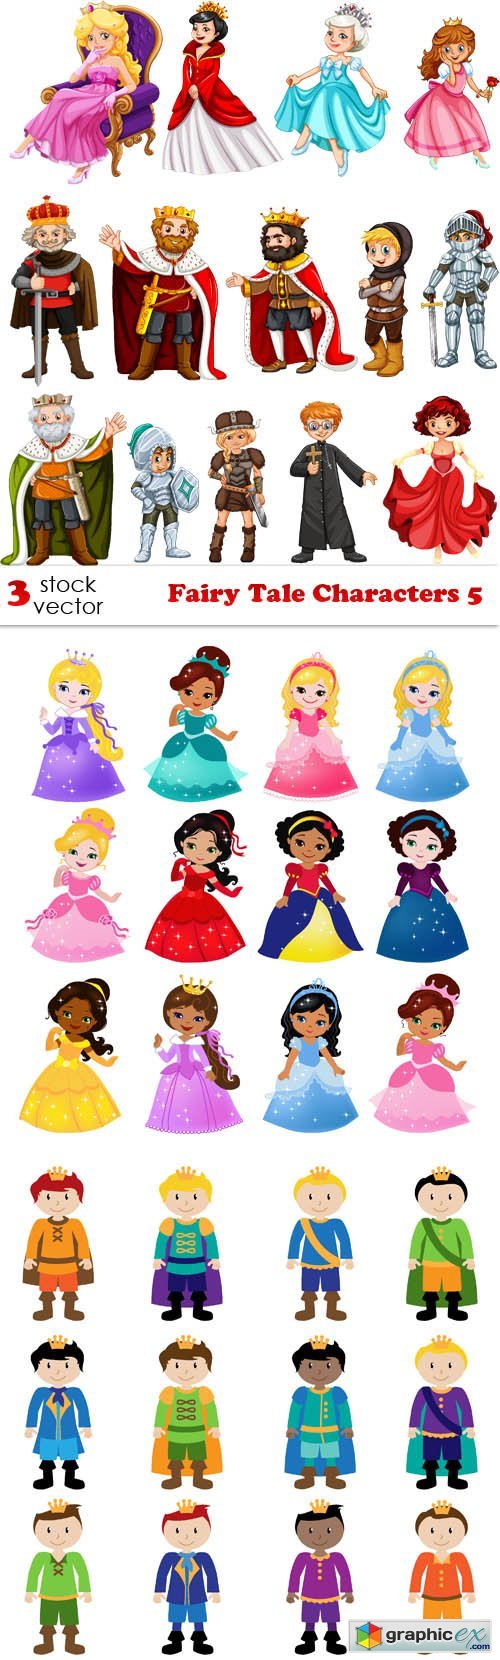 Fairy Tale Characters 5